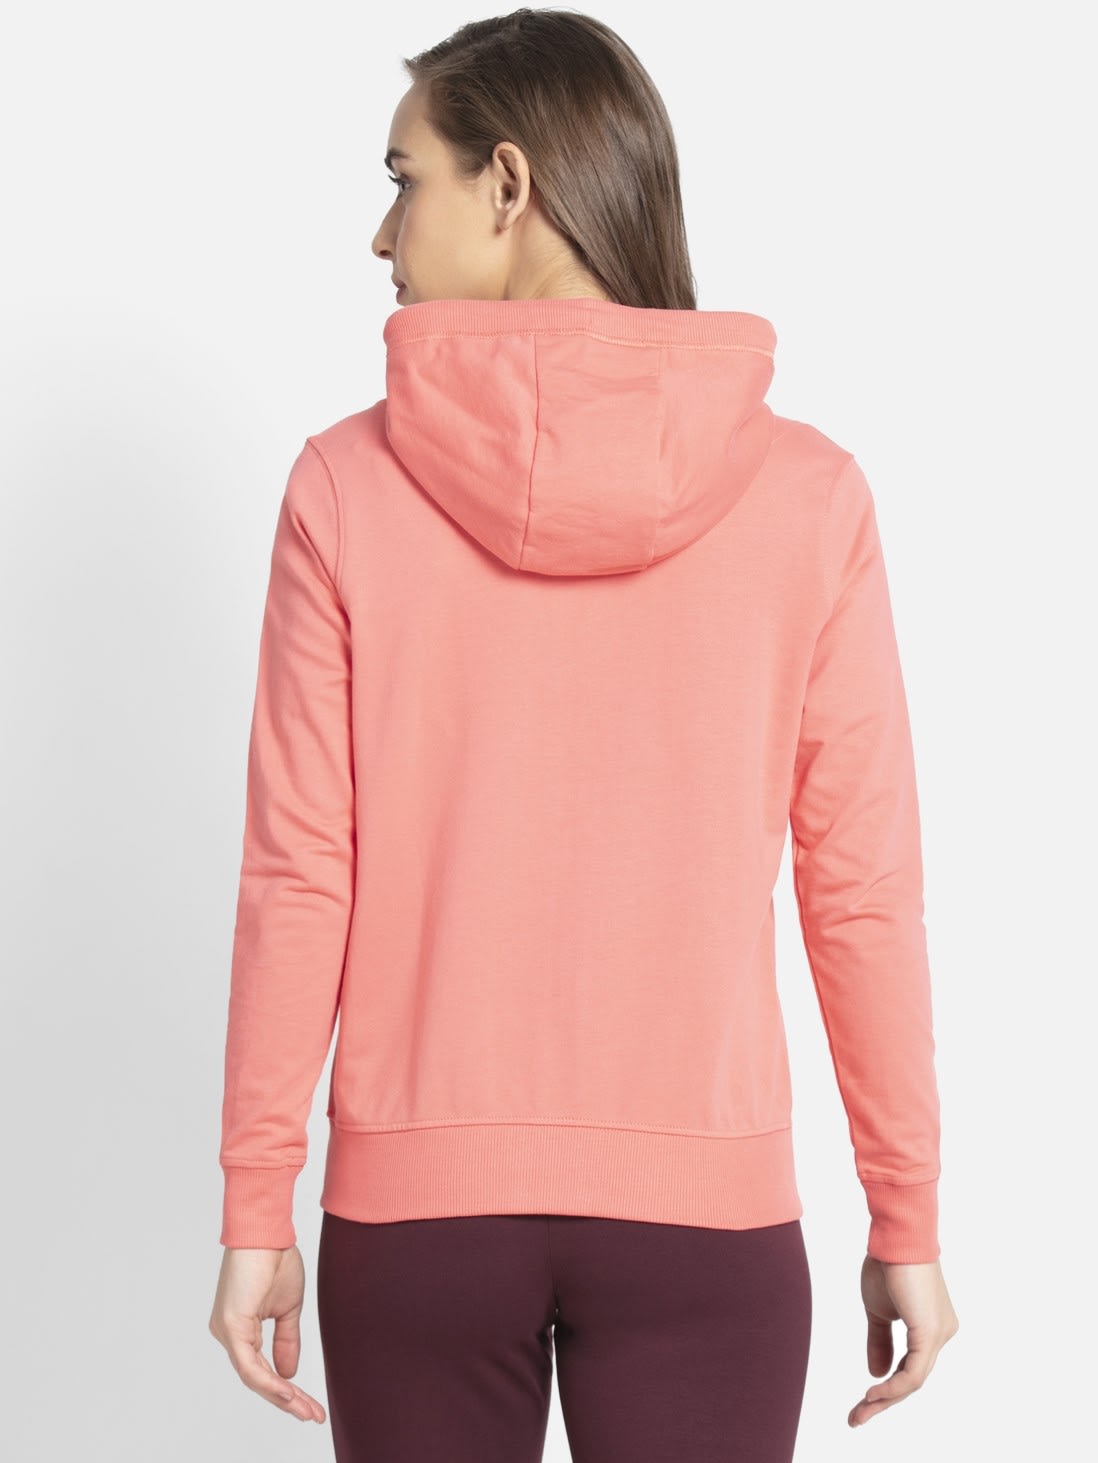 Buy Blush Pink Full Sleeve Full Zip Hoodie with Pocket for Women AW30 ...